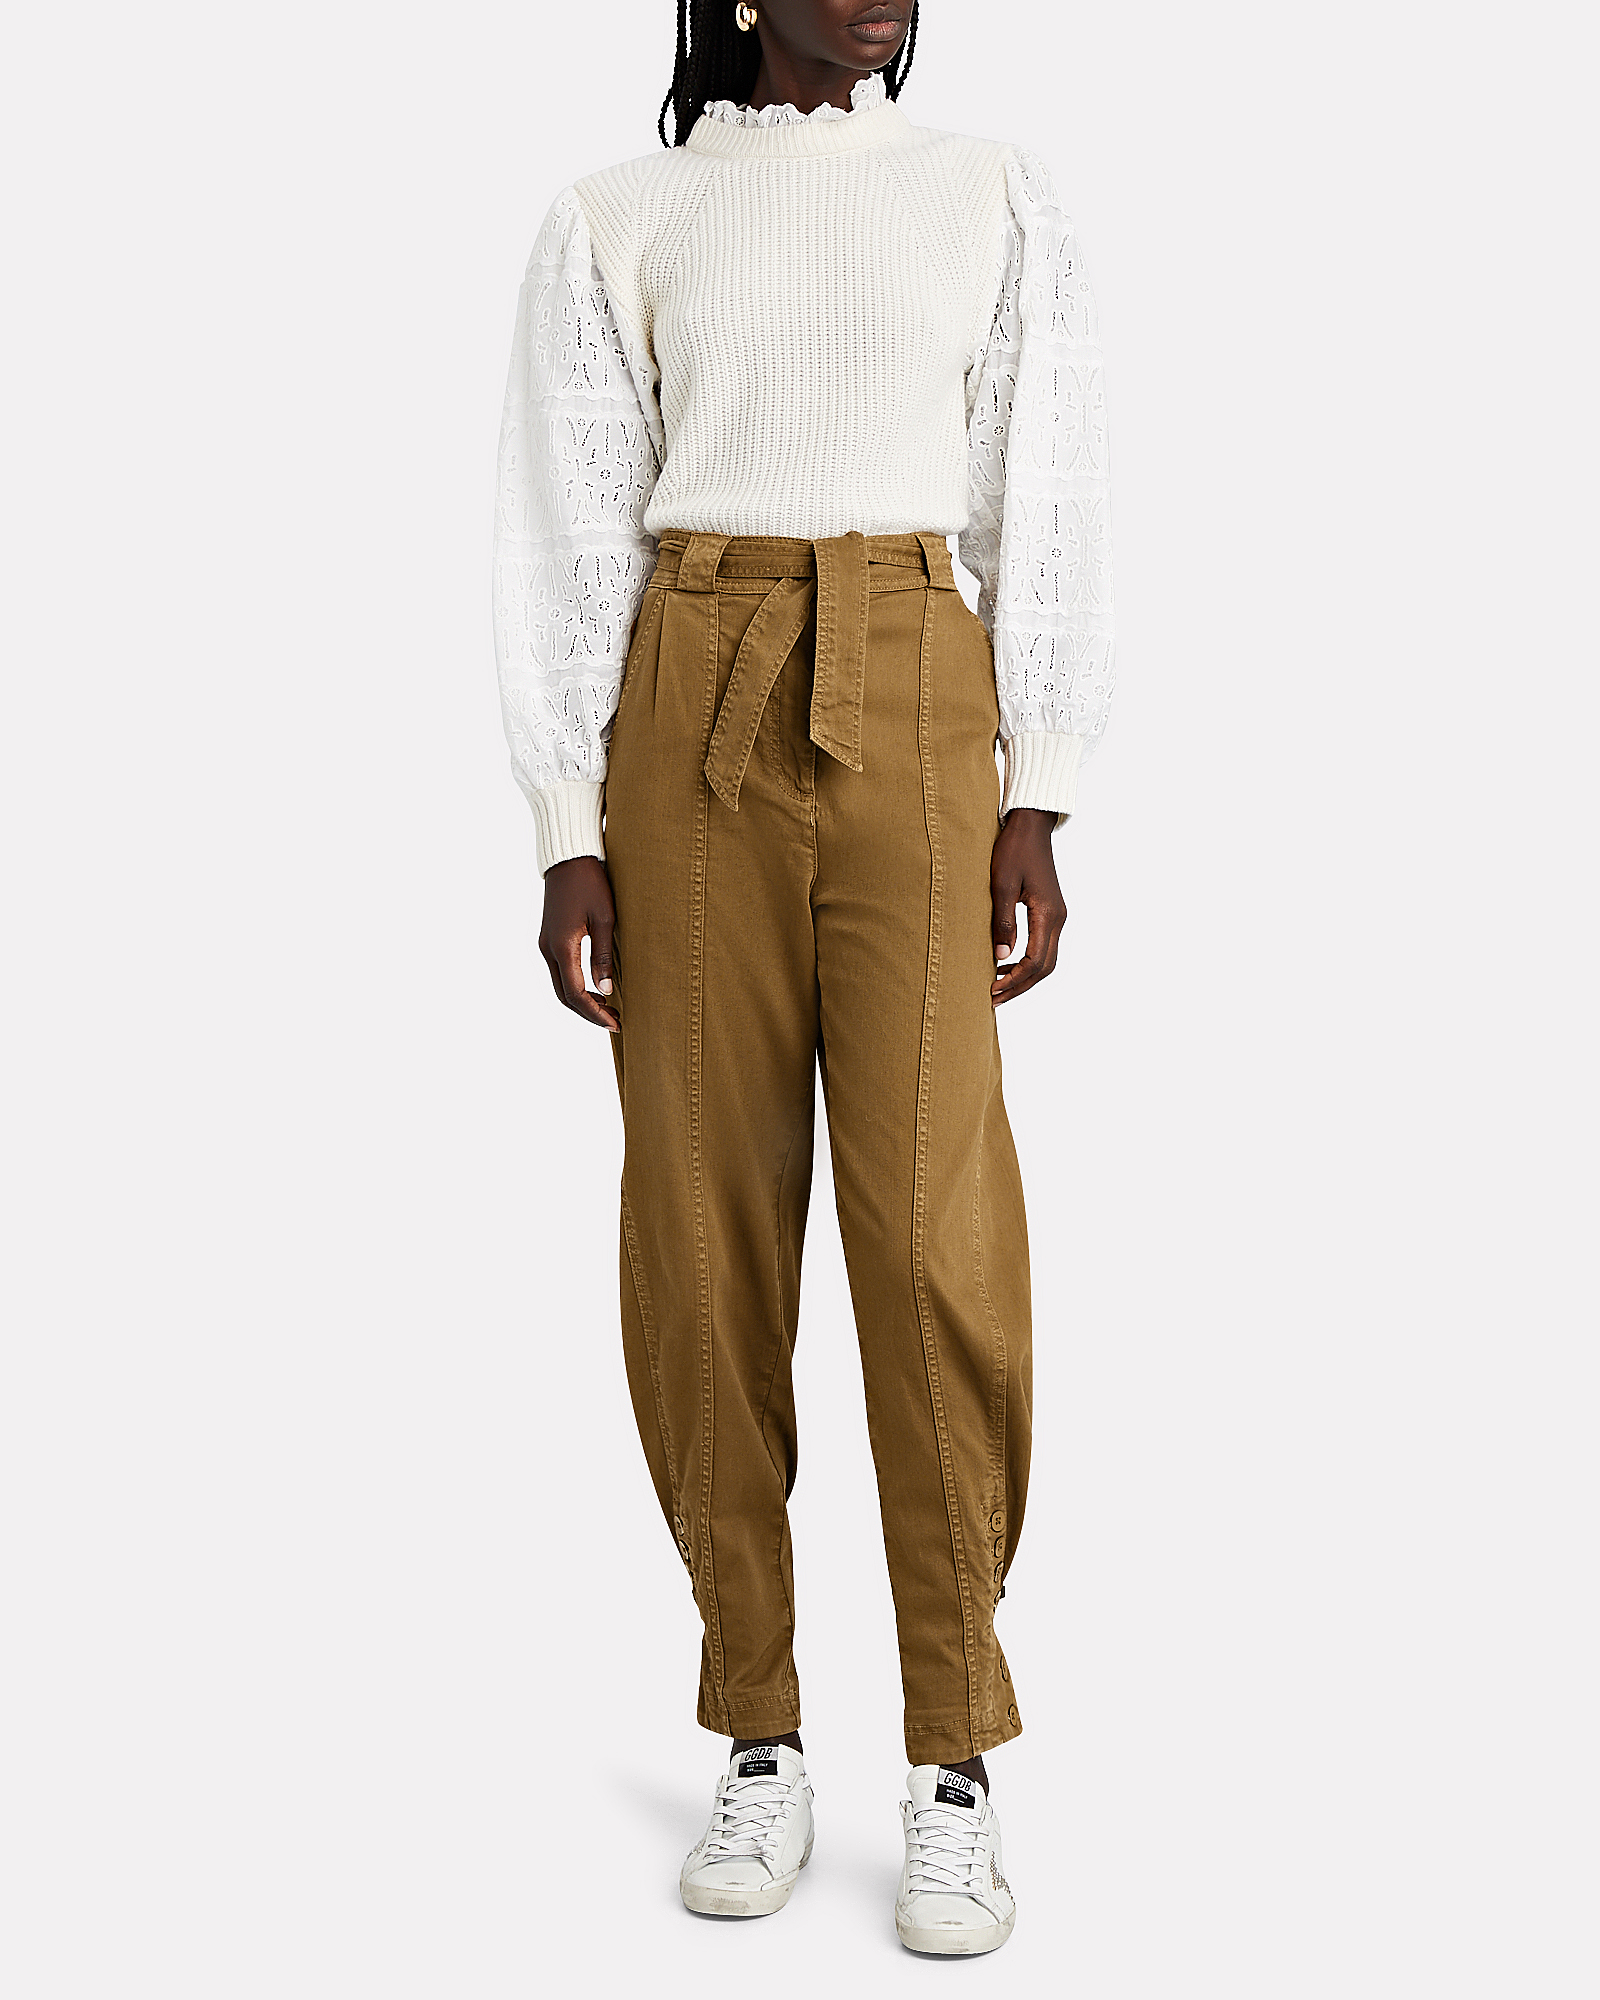 Ulla Johnson Carmen Belted Tapered Jeans | INTERMIX®